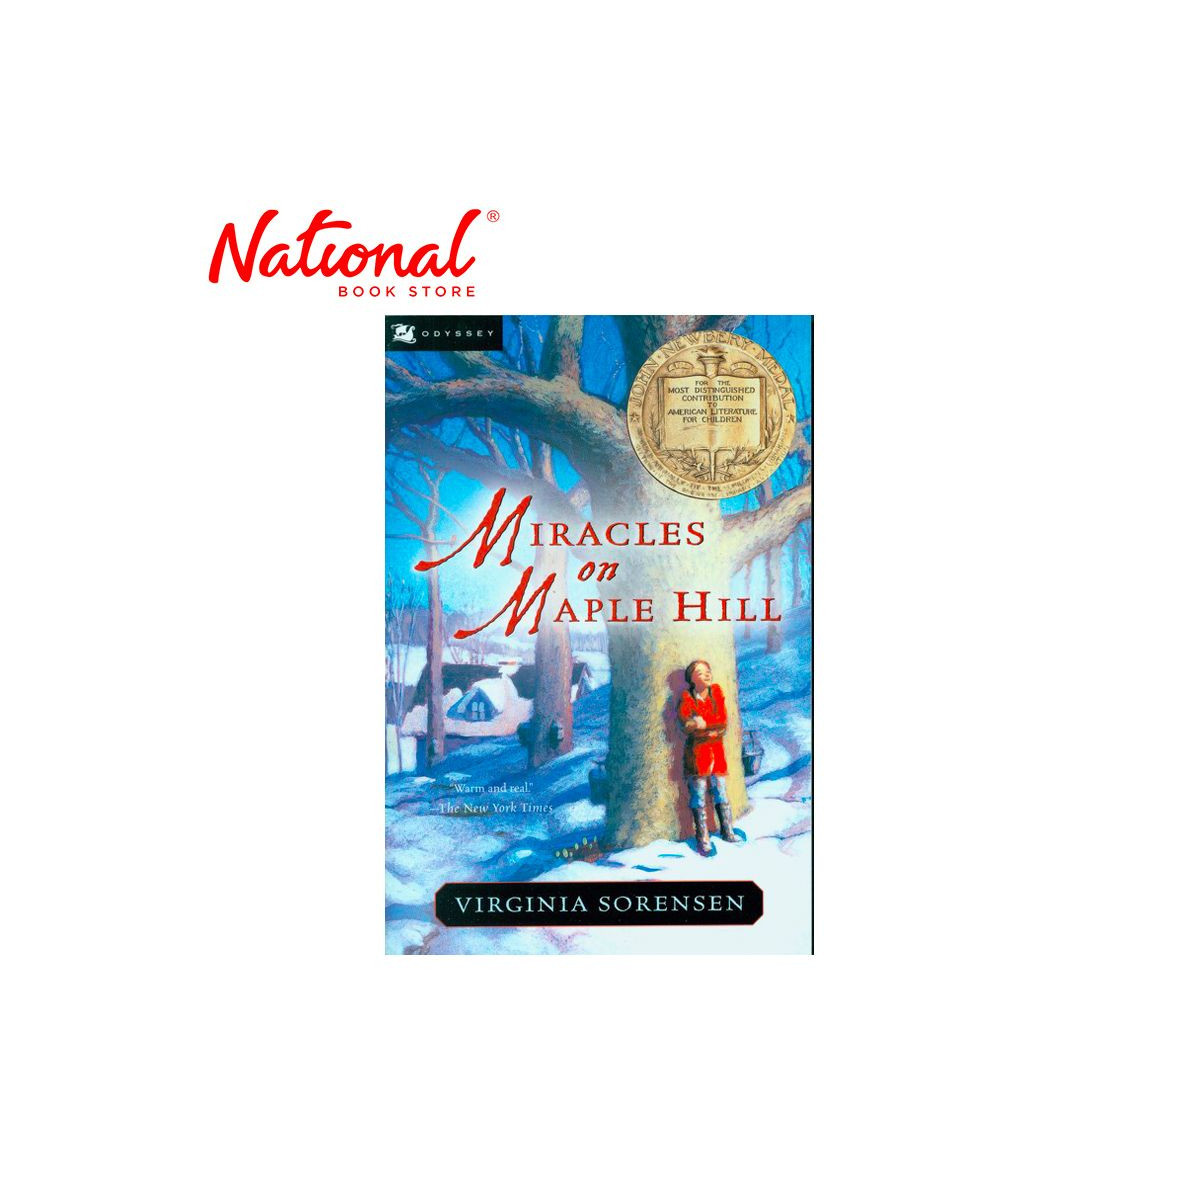 Miracles On Maple Hill Trade Paperback by Virginia Sorensen - Teens Fiction